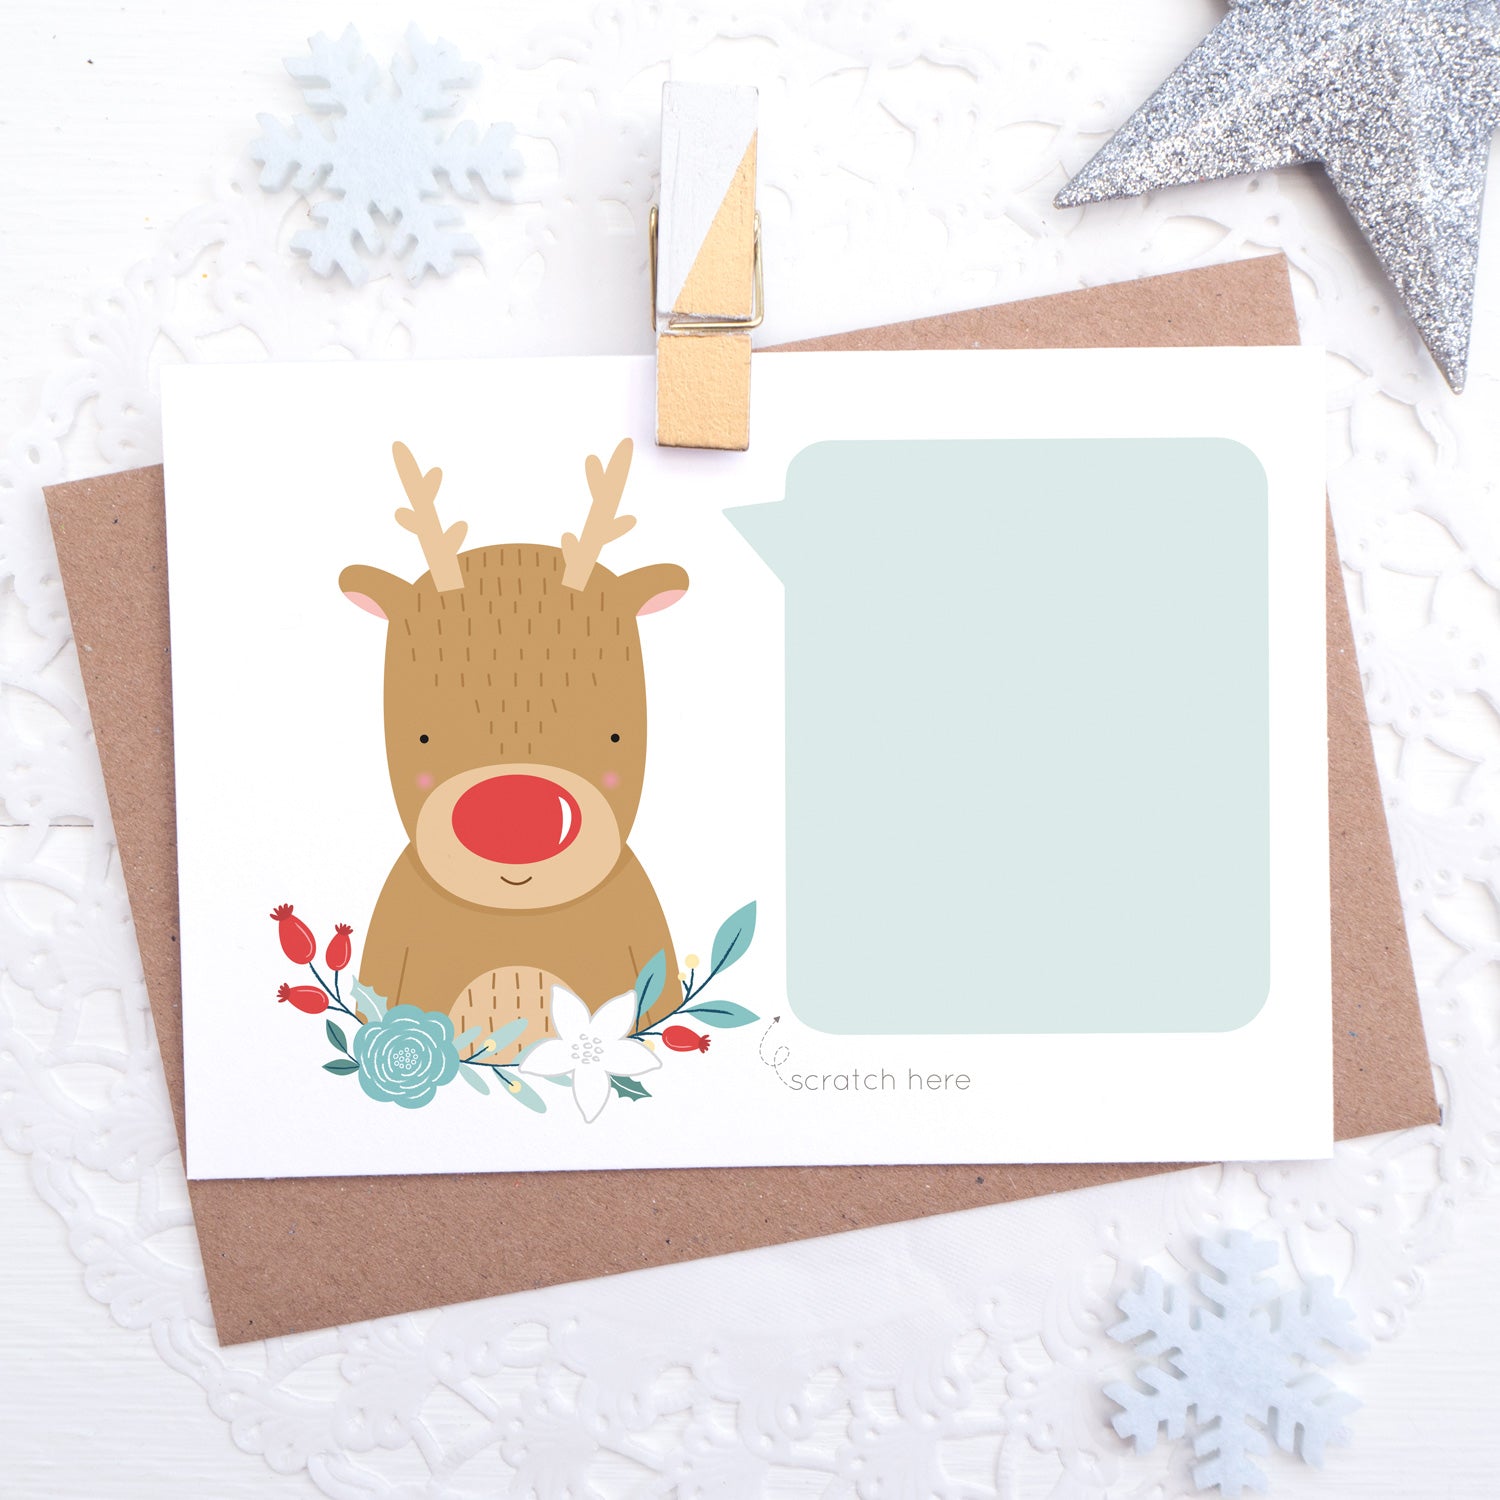 A christmas themed, write your own message scratch and reveal card featuring a red nosed reindeer, some winter florals a big blue blank area for you to hand write your message.